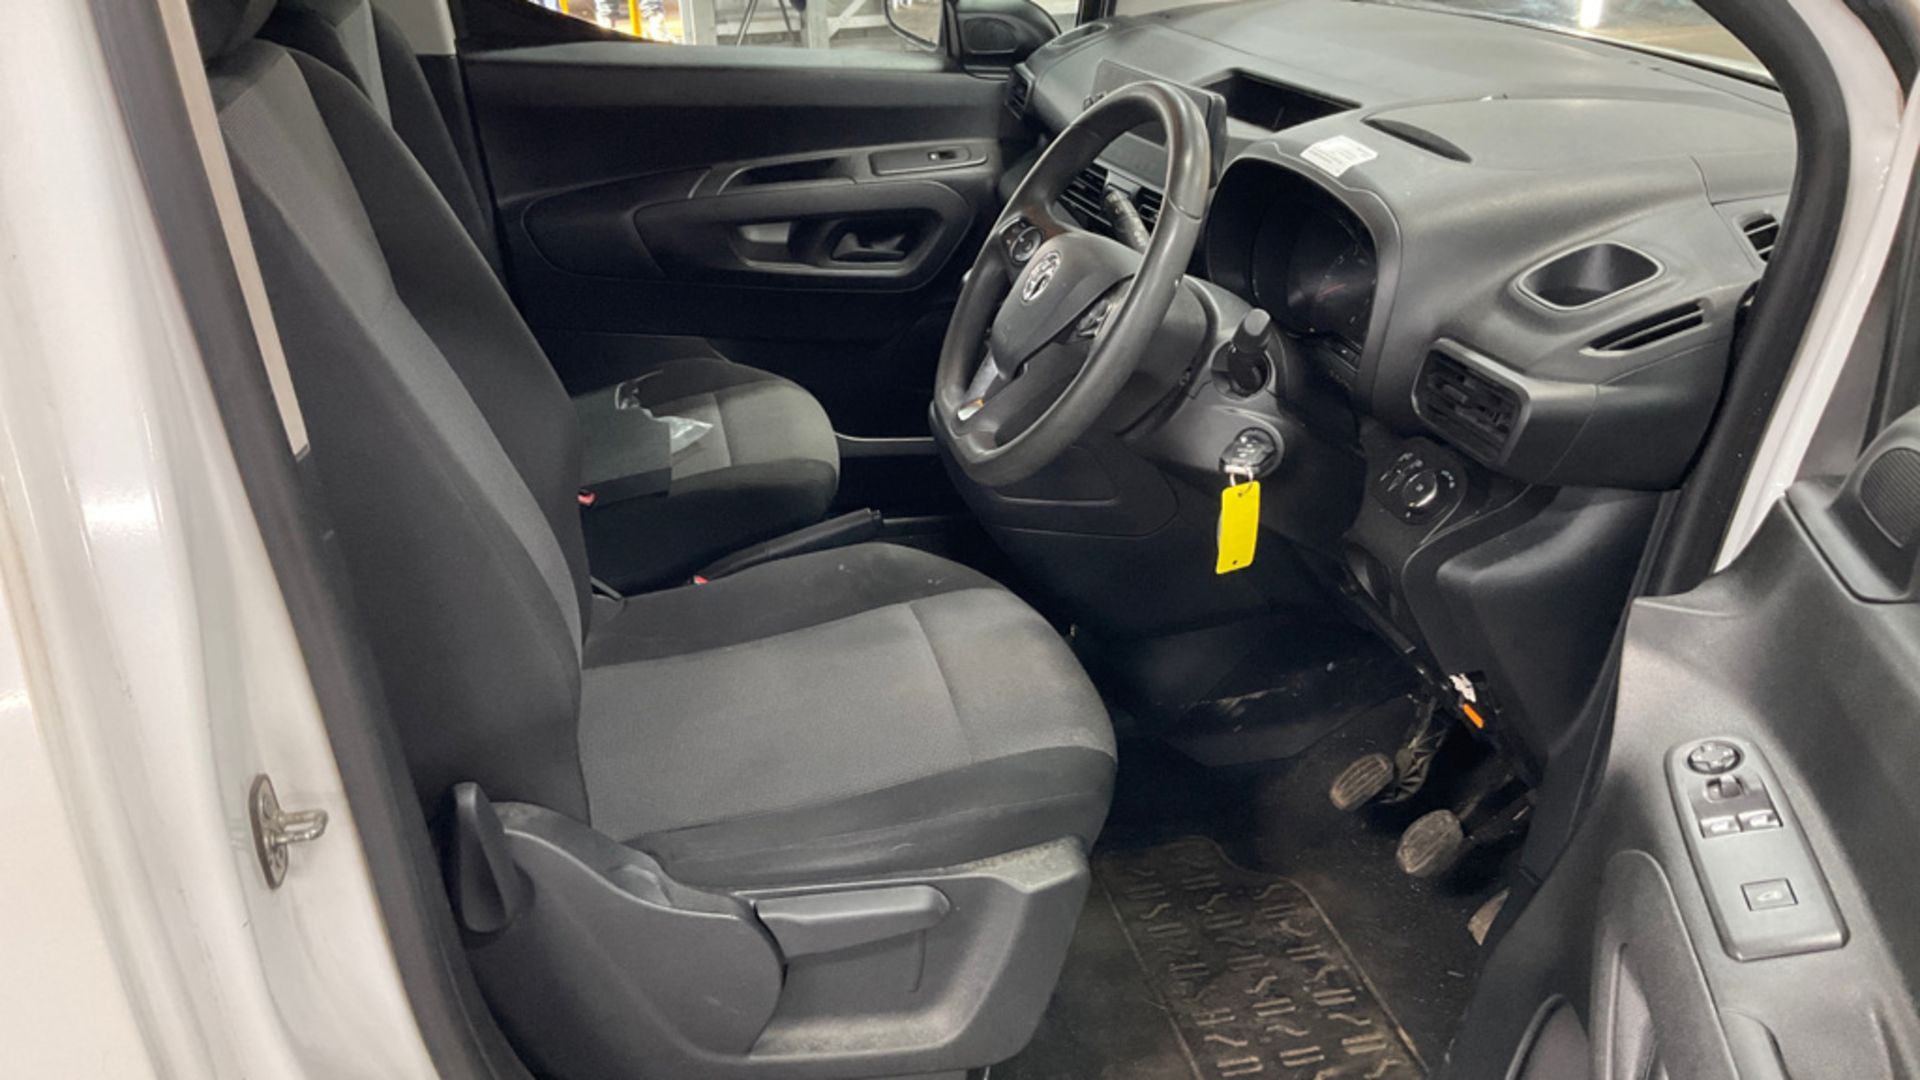 Vauxhall Combo 1.5 Cdti "Sportive" 2020 Reg - 1 Owner - Air Con , Mileage Is Only 79k Miles With FSH - Image 7 of 8